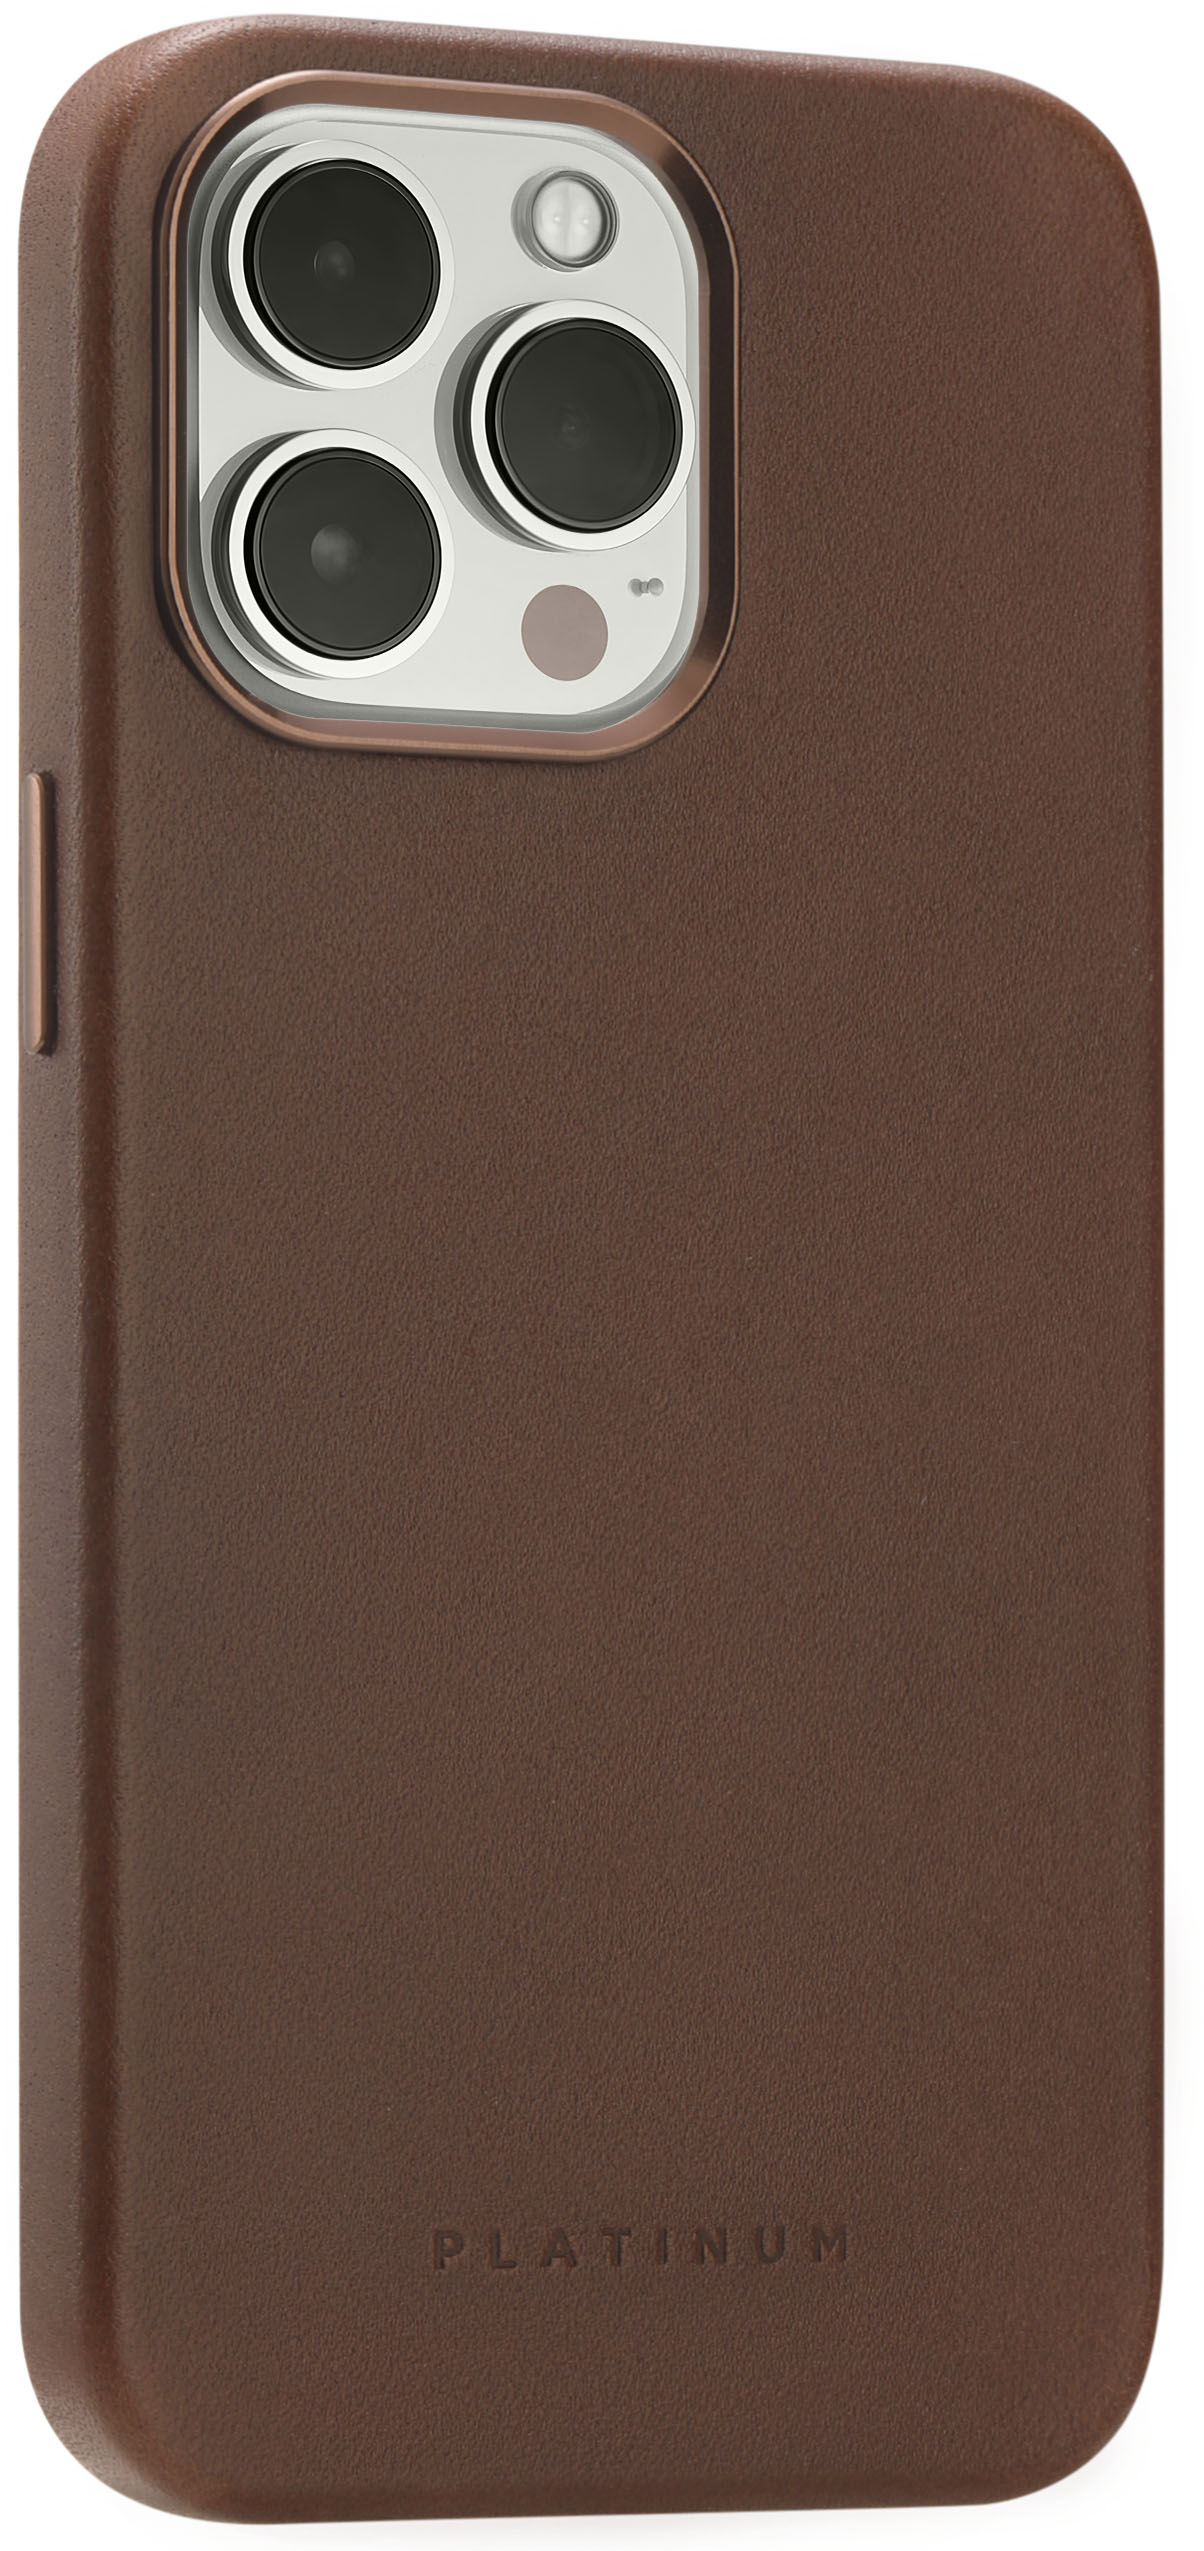 Platinum™ Horween Leather Case for iPhone 13 Pro Max and iPhone 12